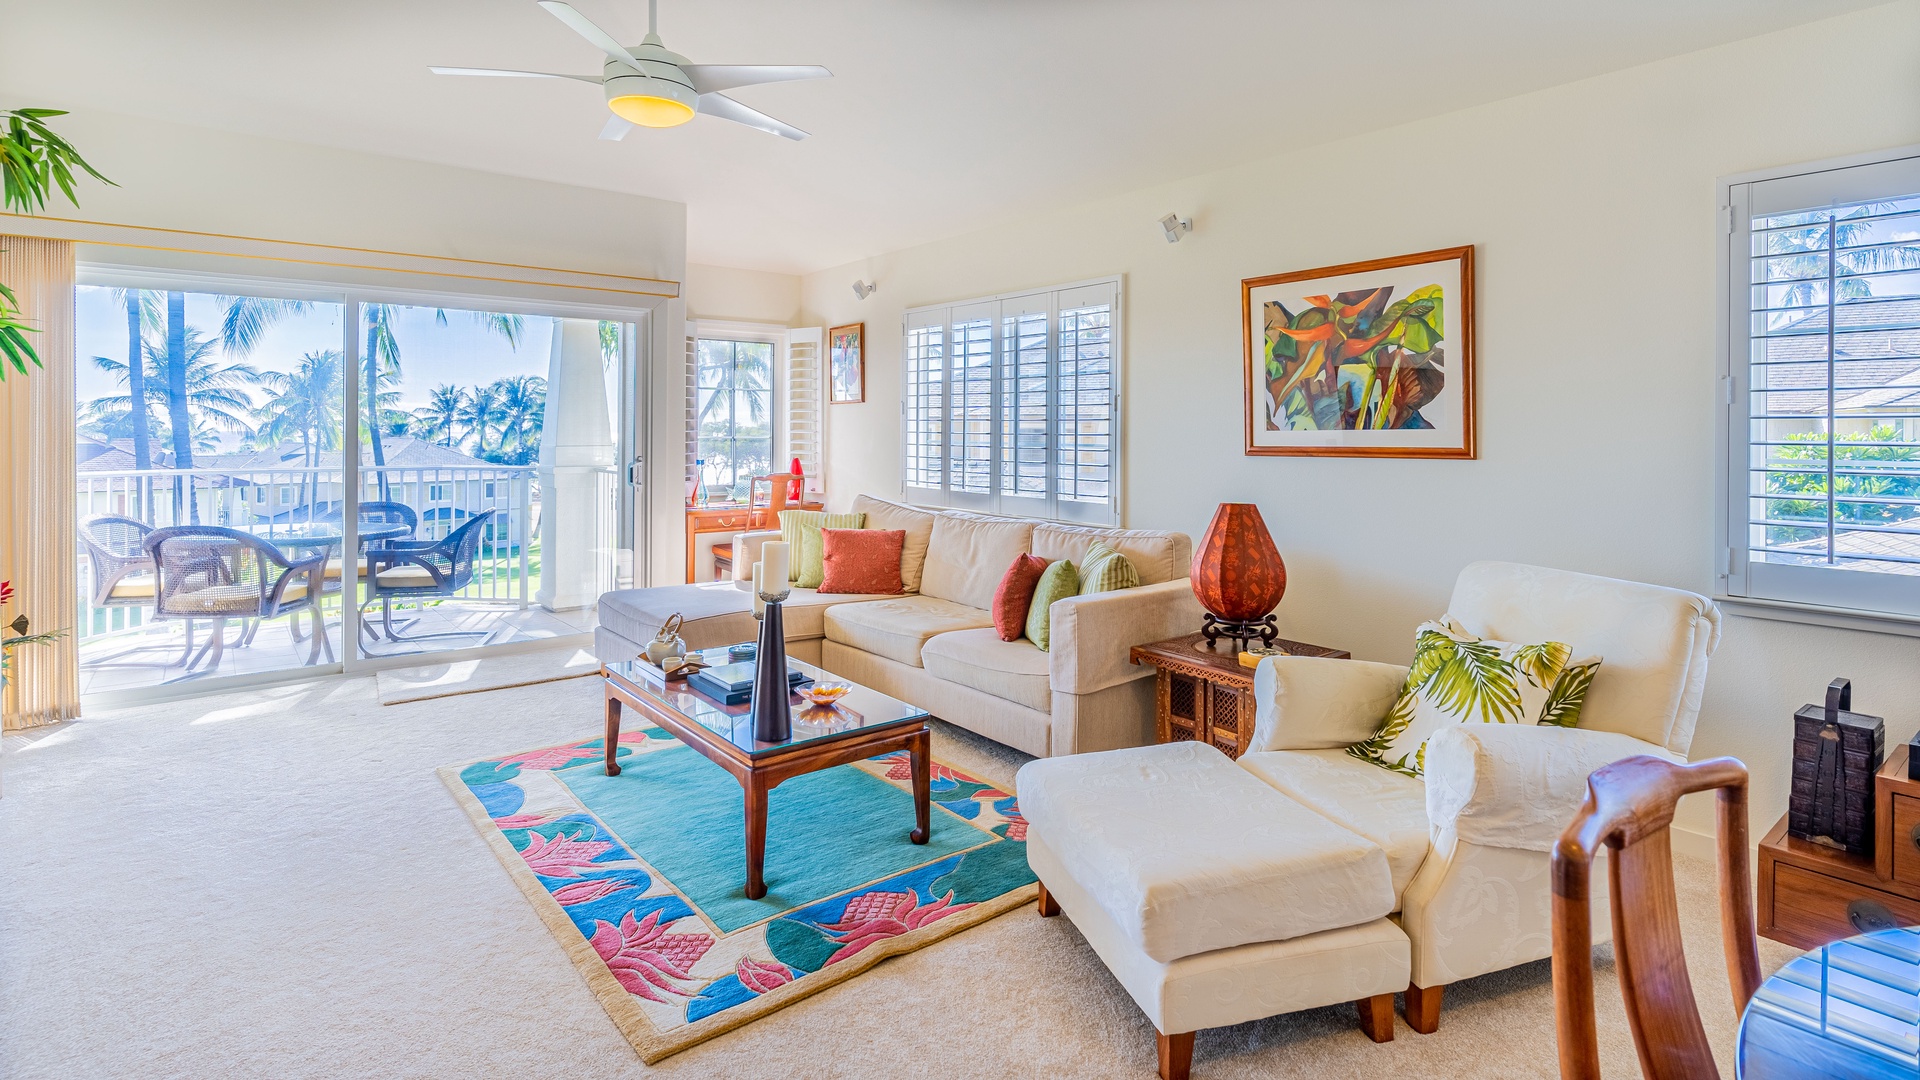 Kapolei Vacation Rentals, Kai Lani 16C - The open living area is comfortably appointed with natural lighting and lovely views.